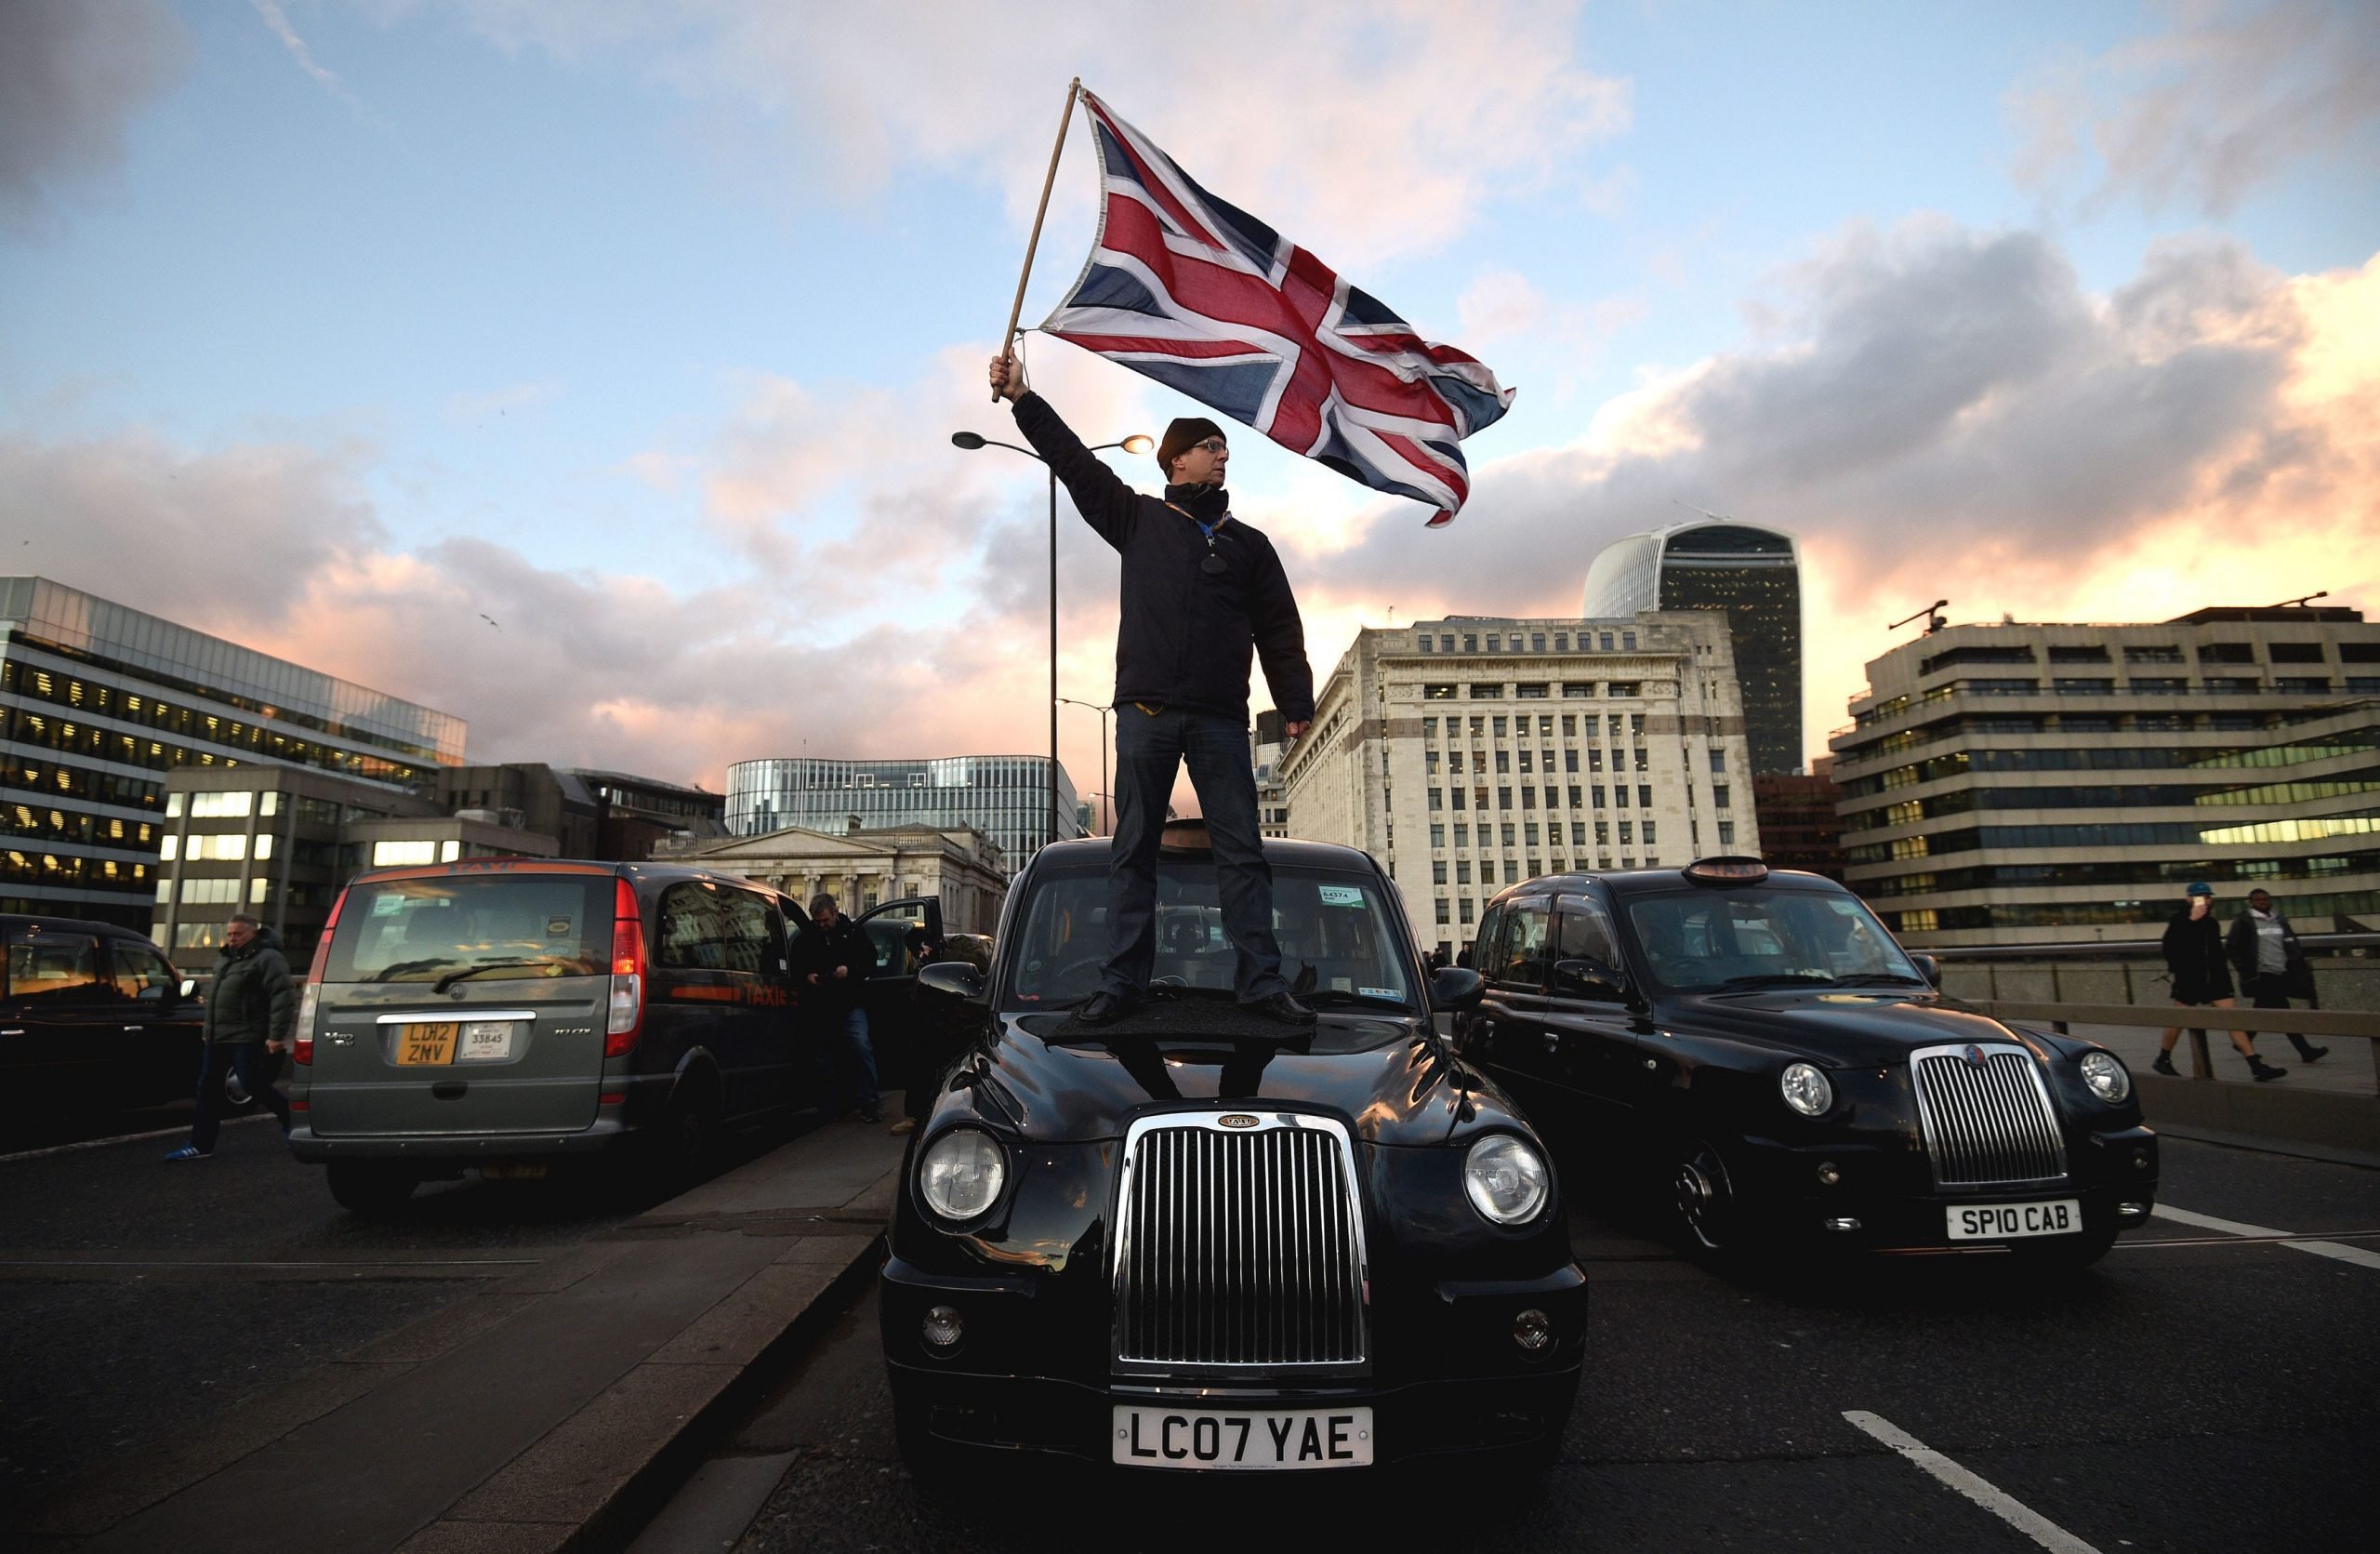 Uber London - Black cab taxi protest